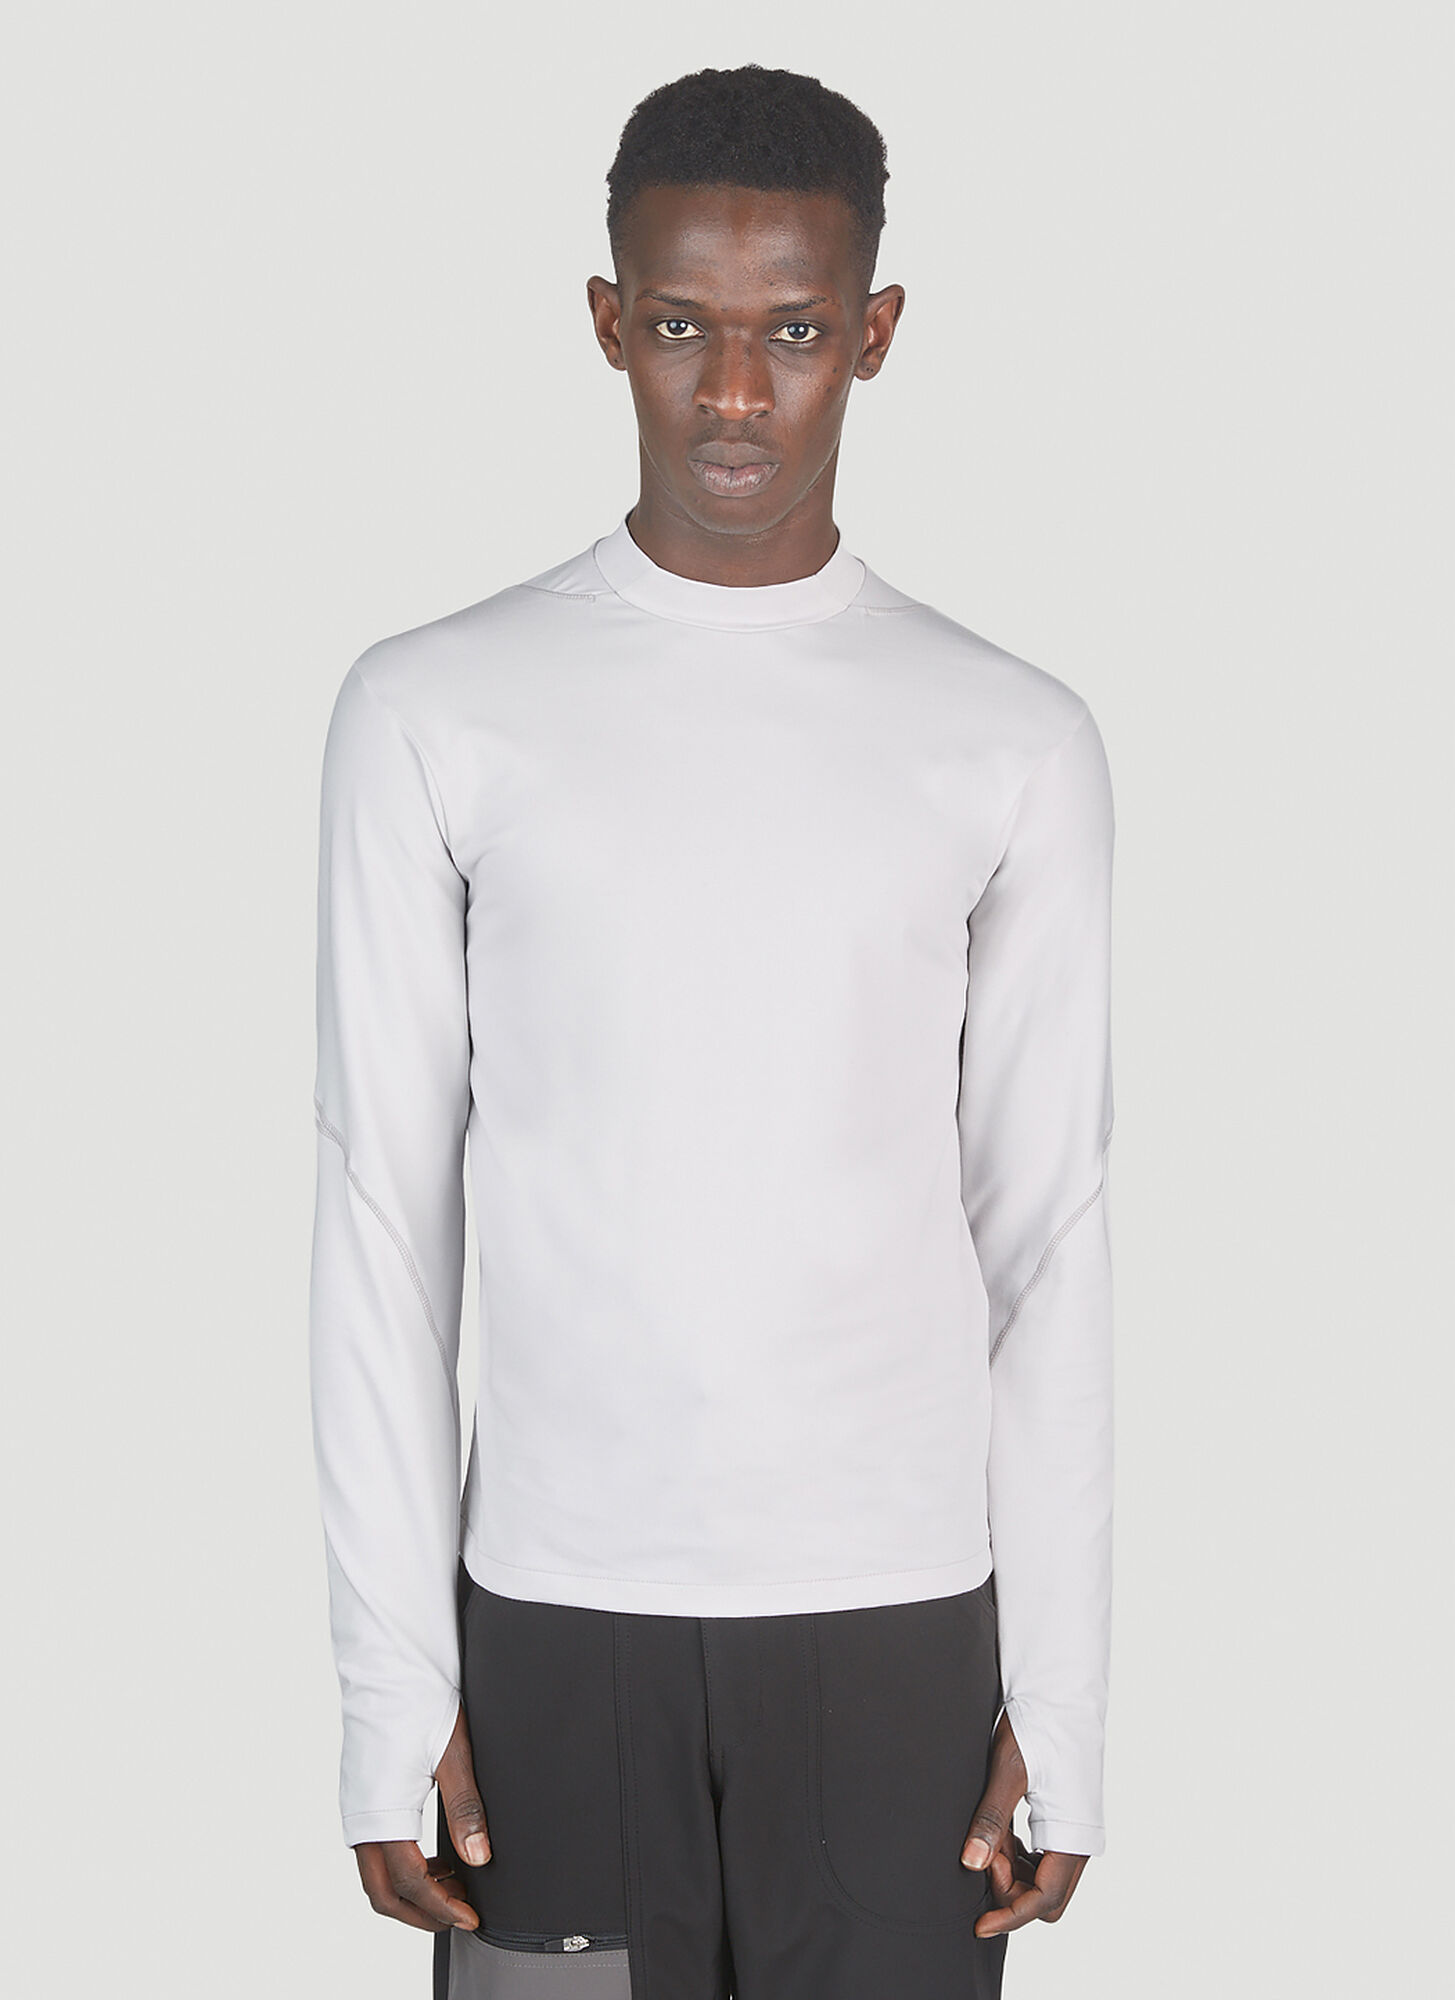 Post Archive Faction (paf) 5.0 Long Sleeve Top